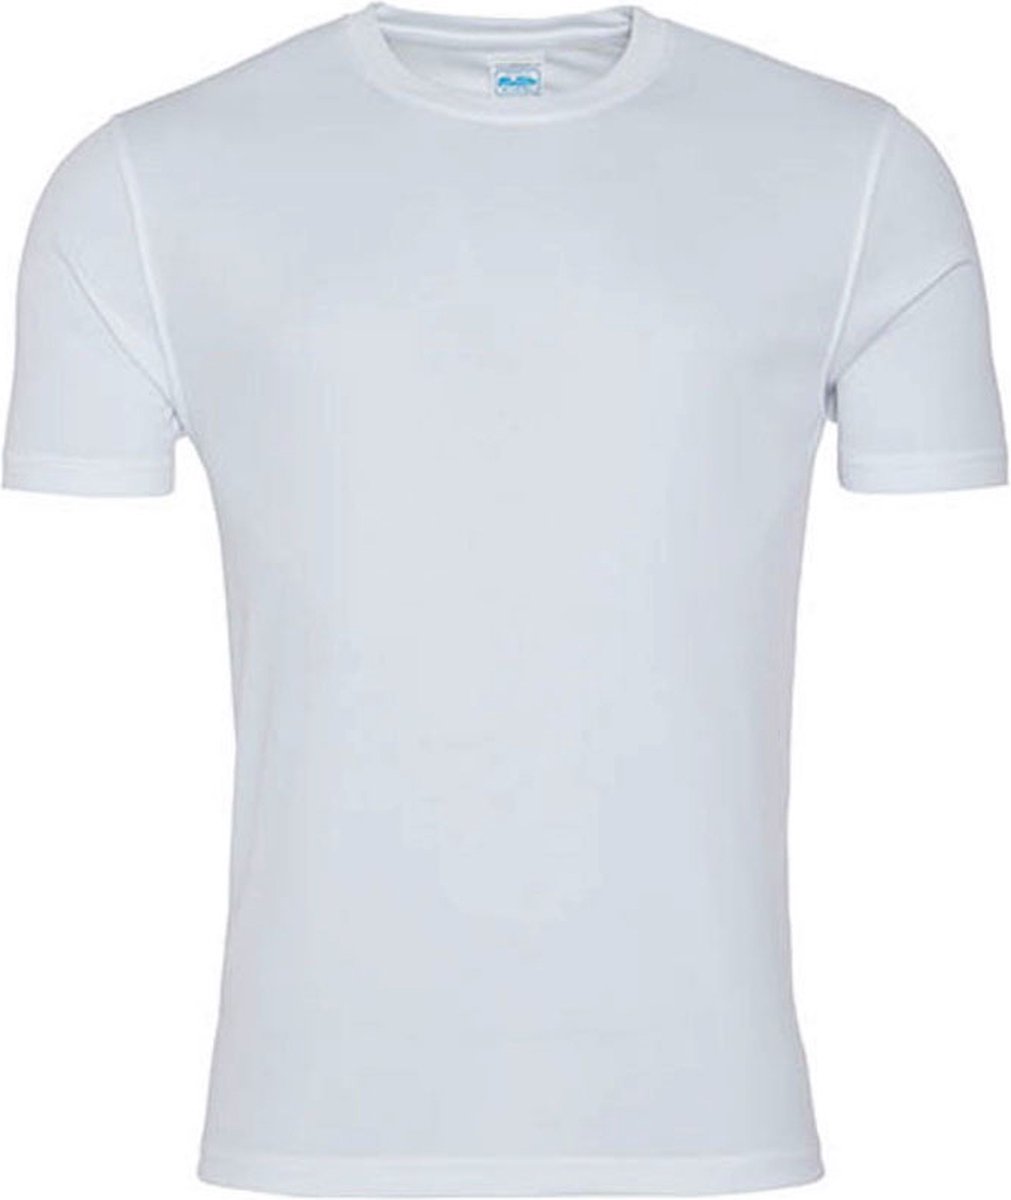 Herensportshirt 'Cool Smooth' Arctic White - XS